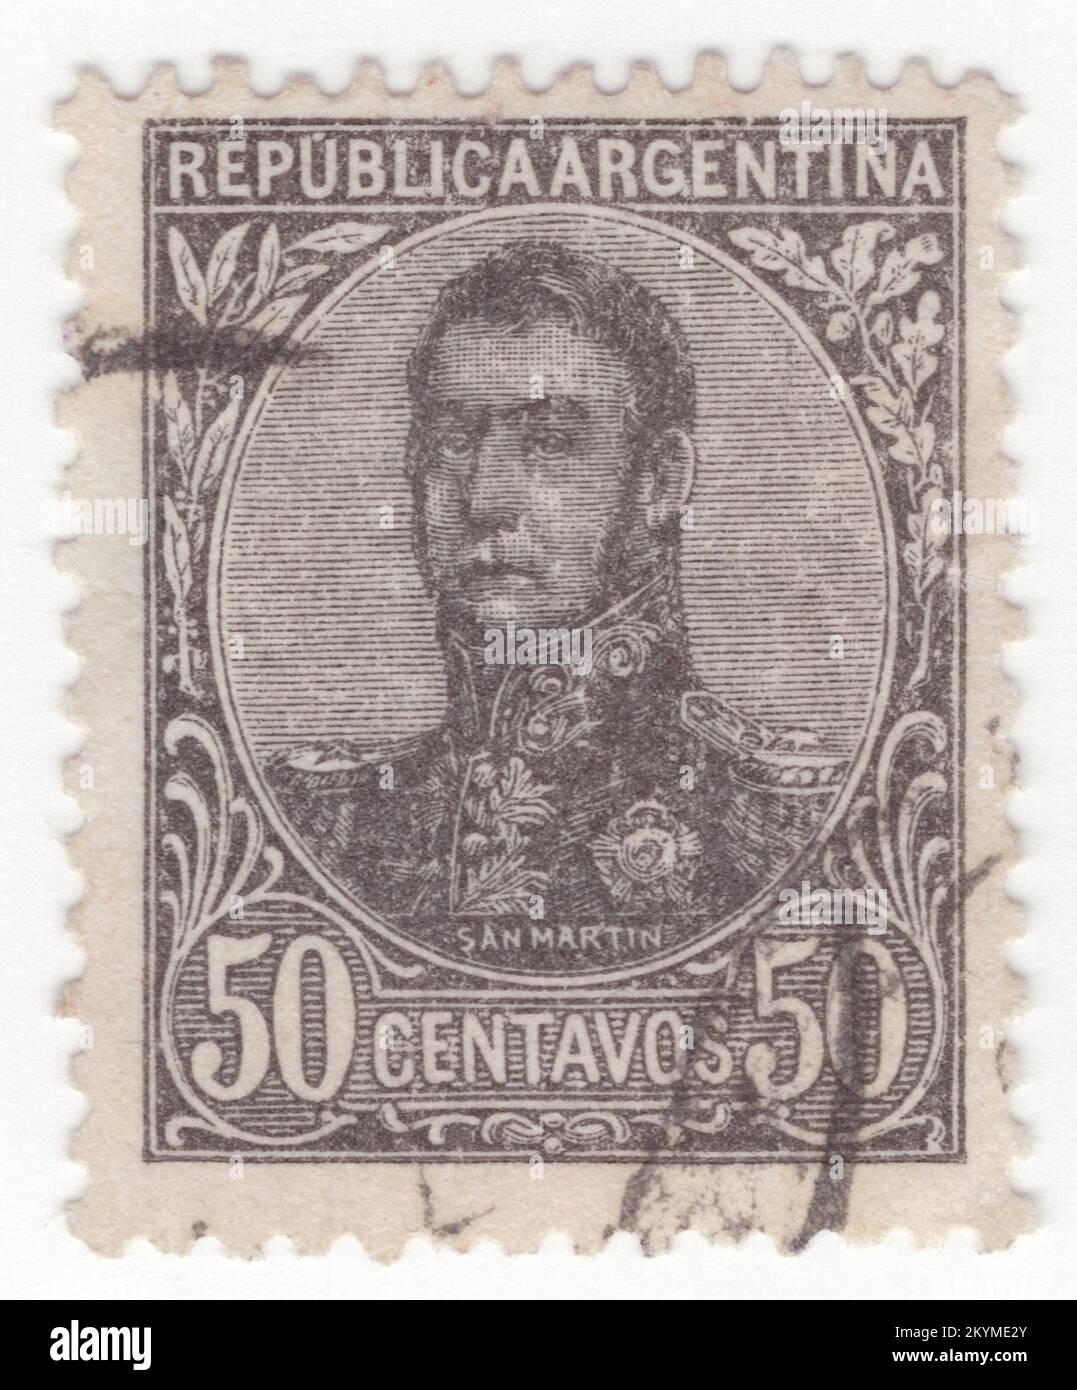 ARGENTINA - 1908: 50 centavos black postage stamp depicting portrait of José de San Martín (Jose Francisco de San Martín y Matorras), known as the Liberator of Argentina, Chile and Peru. Argentine general and the primary leader of the southern and central parts of South America's successful struggle for independence from the Spanish Empire who served as the Protector of Peru. Born in Yapeyú, Corrientes, in modern-day Argentina, he left the Viceroyalty of the Río de la Plata at the early age of seven to study in Málaga, Spain Stock Photo